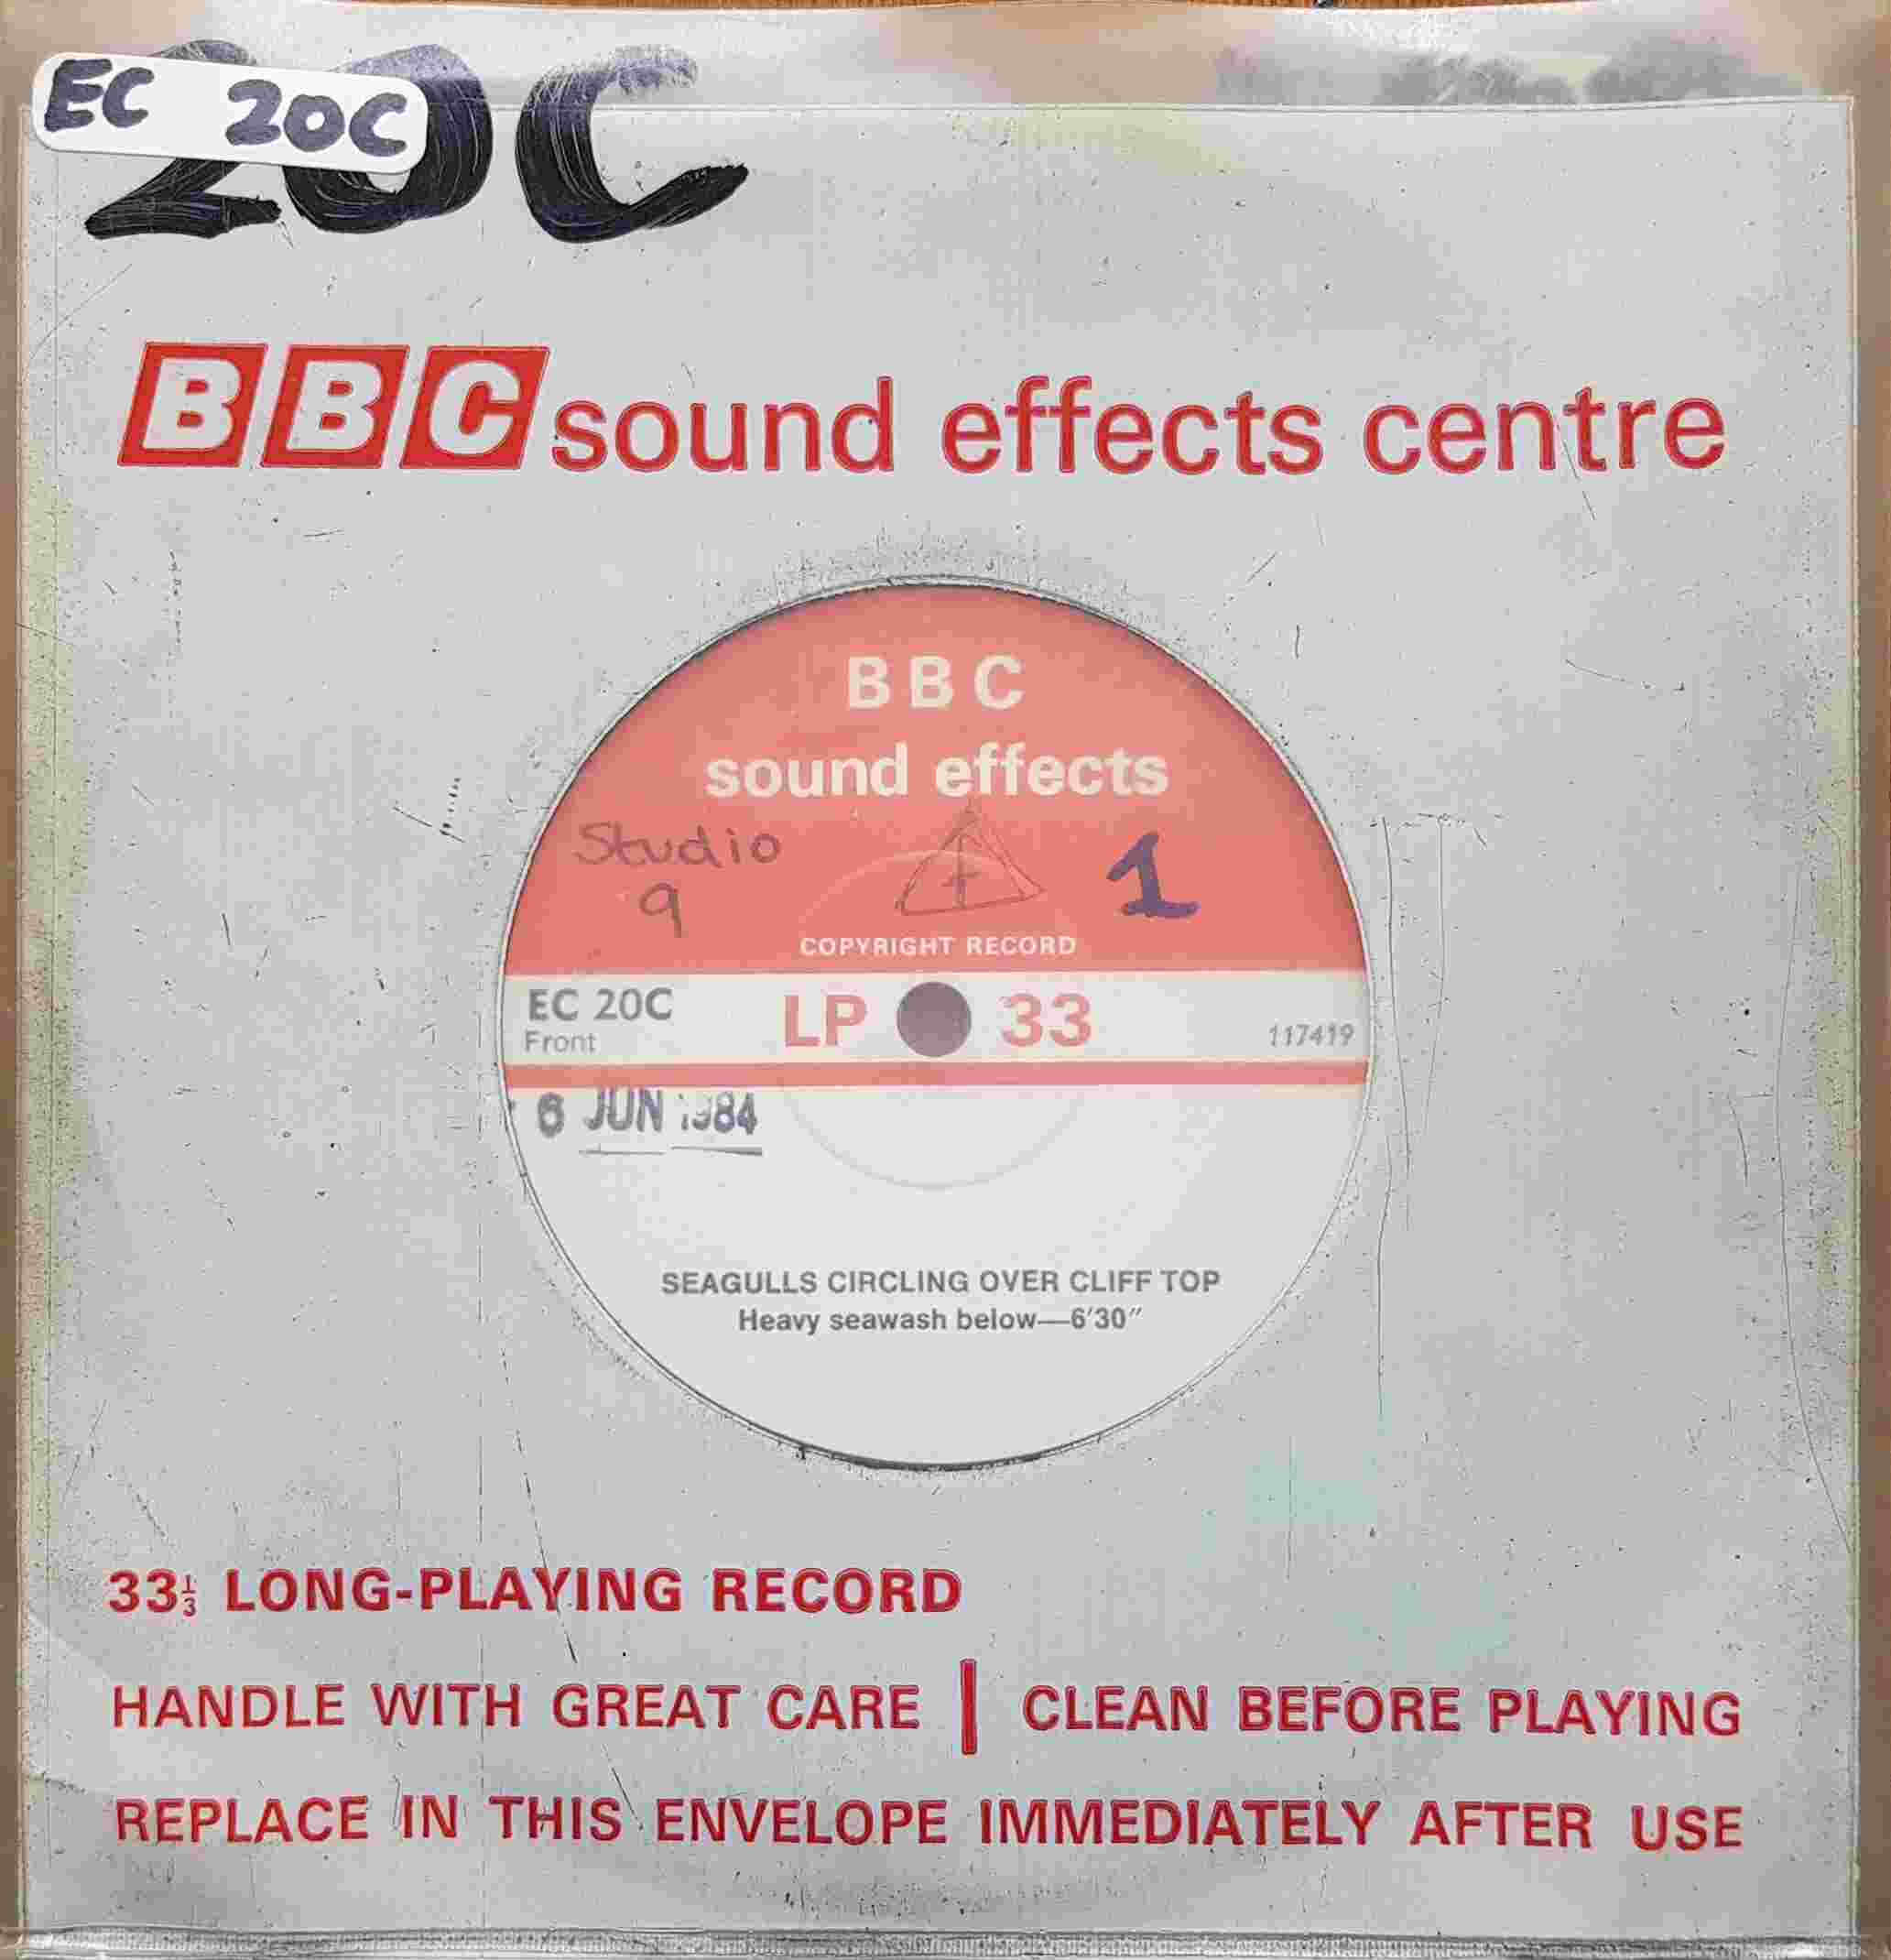 Picture of EC 20C Seagulls circling over cliff / Dawn in a suburban garden by artist Not registered from the BBC singles - Records and Tapes library